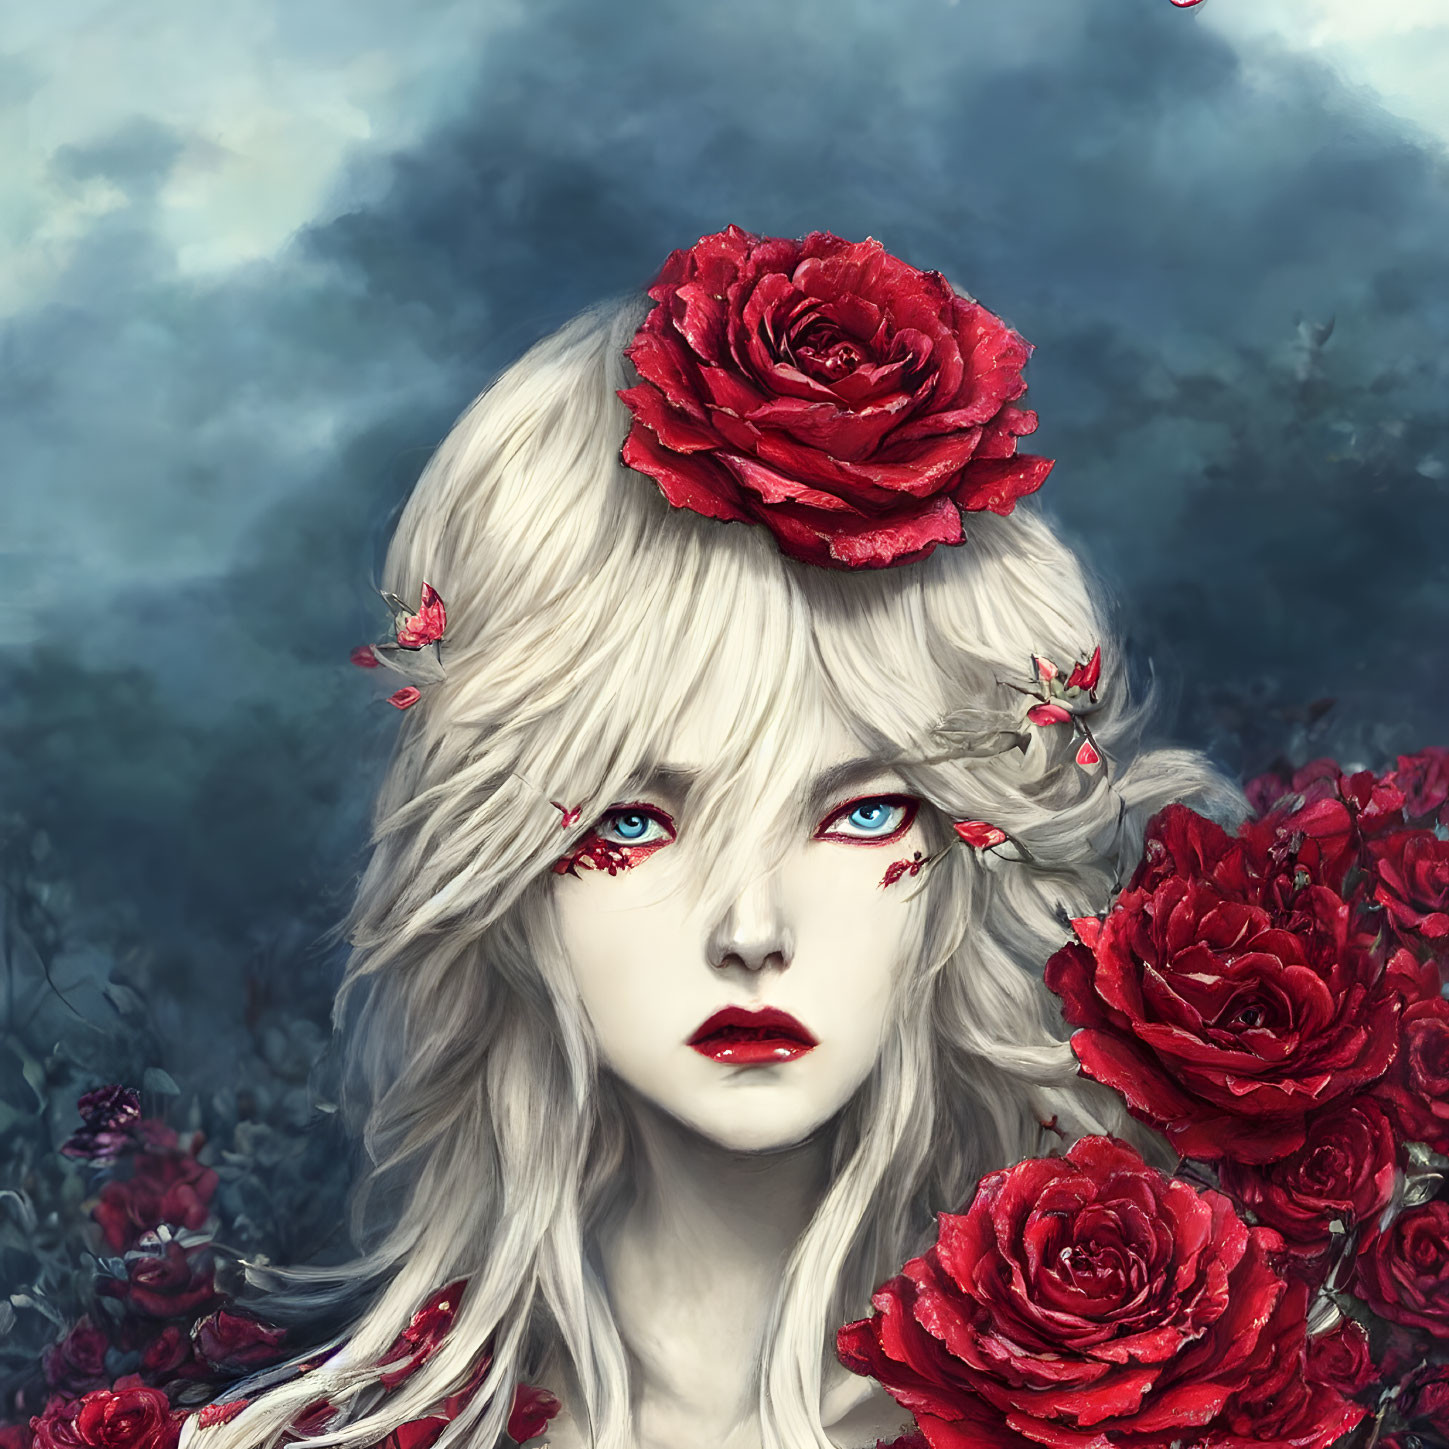 Pale-skinned person with white hair and red eyes surrounded by red roses on a blue-grey backdrop